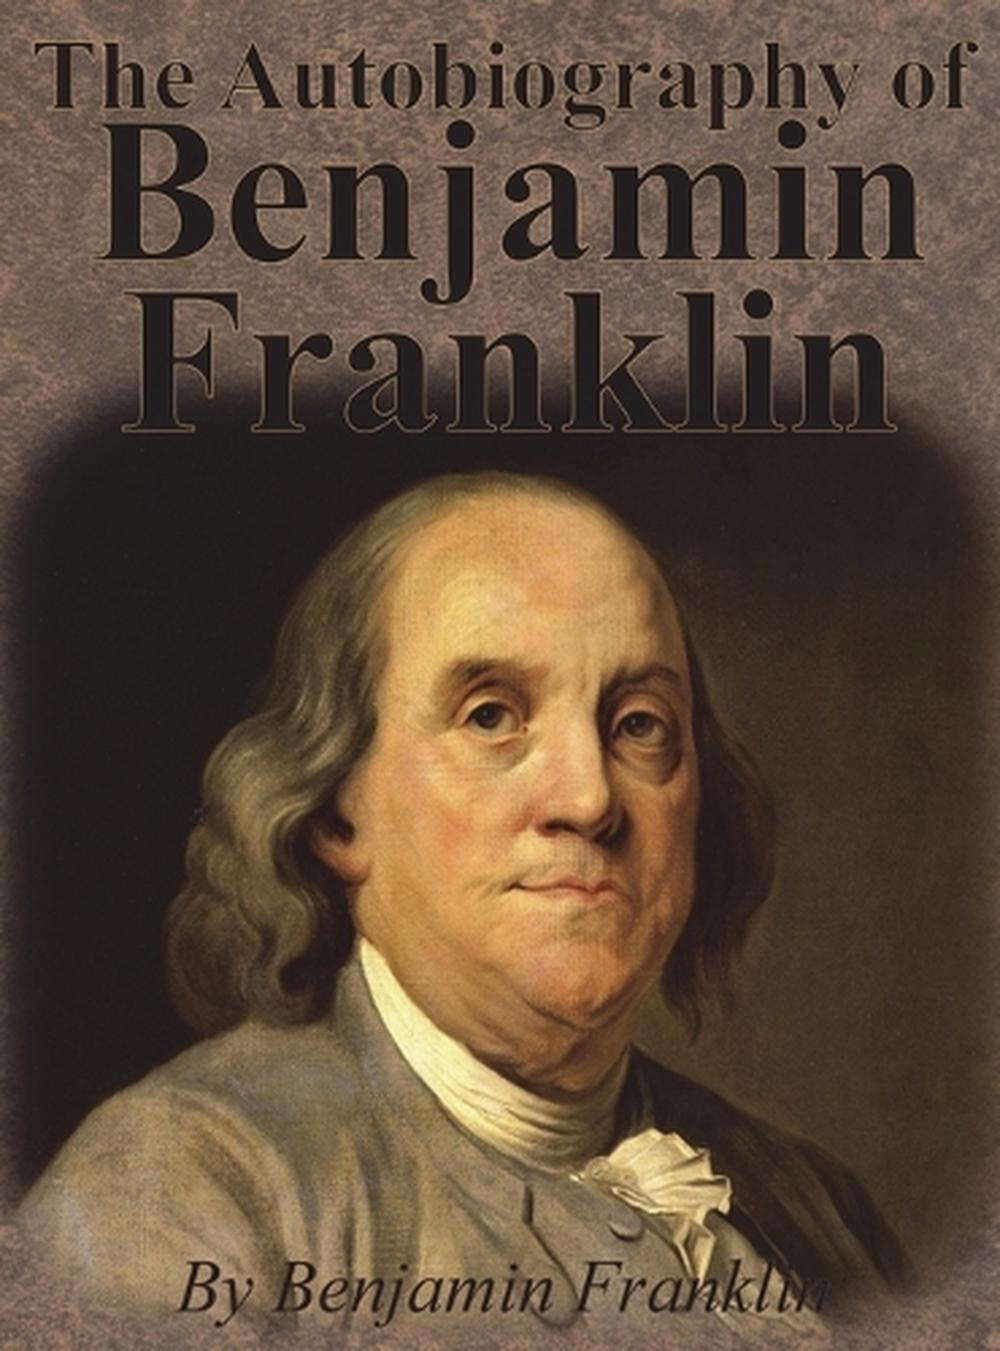 book review of the autobiography of benjamin franklin